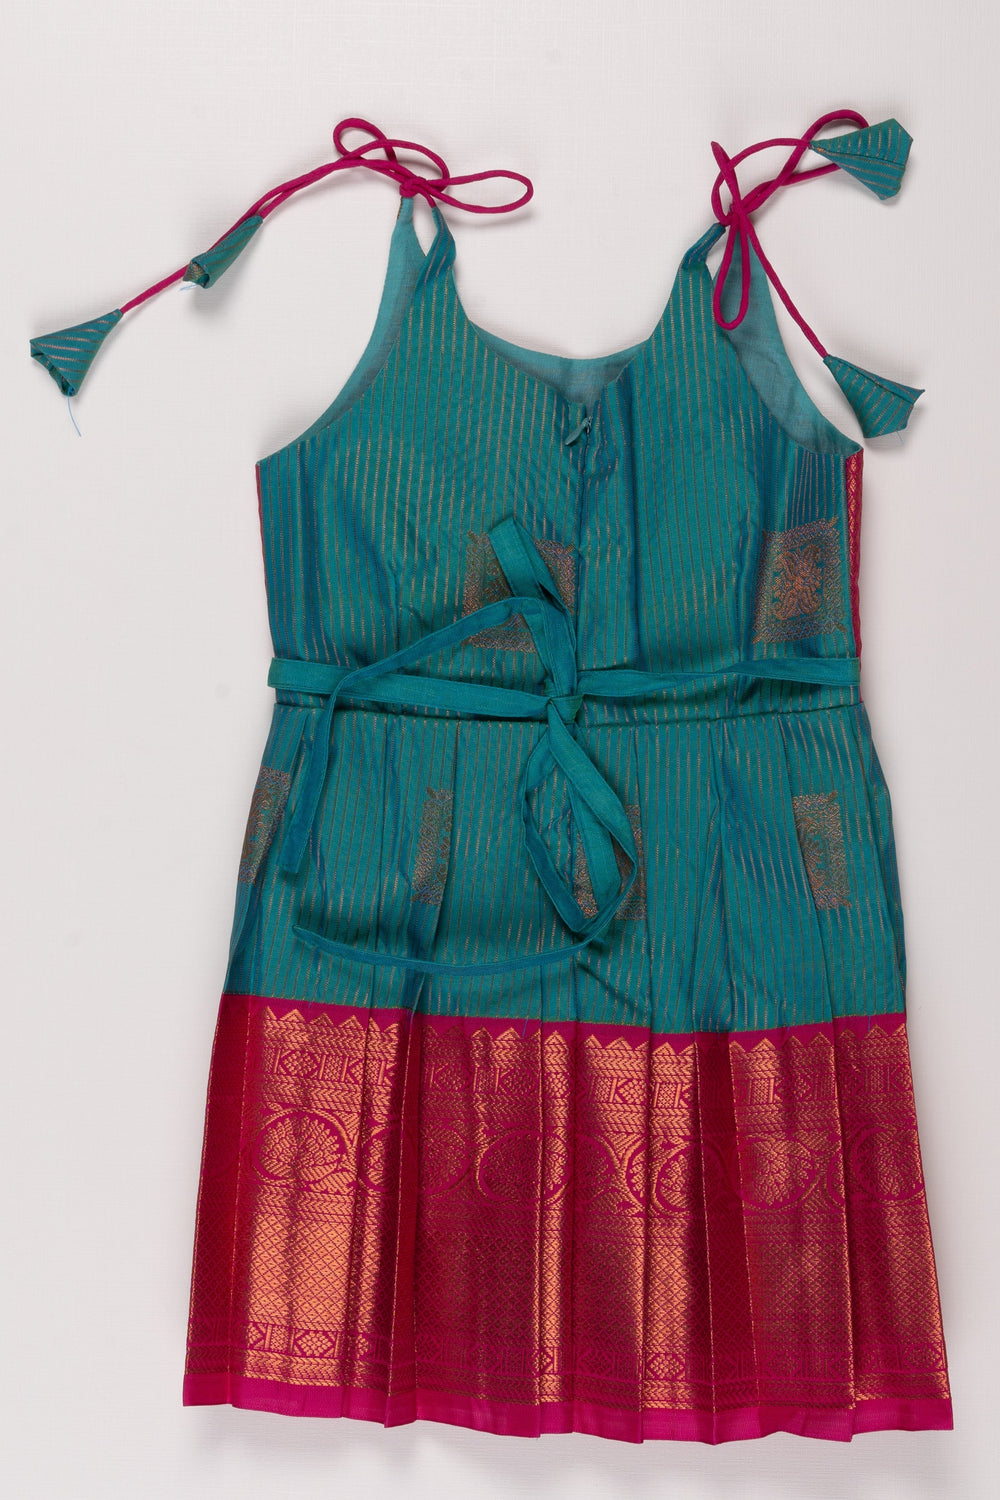 The Nesavu Tie Up Frock Teal Blue and Magenta Silk Frock with Zari Weave and Tie-Up Details Nesavu Teal and Magenta Silk Frock for Girls with Zari Detail | Festive and Playful | The Nesavu